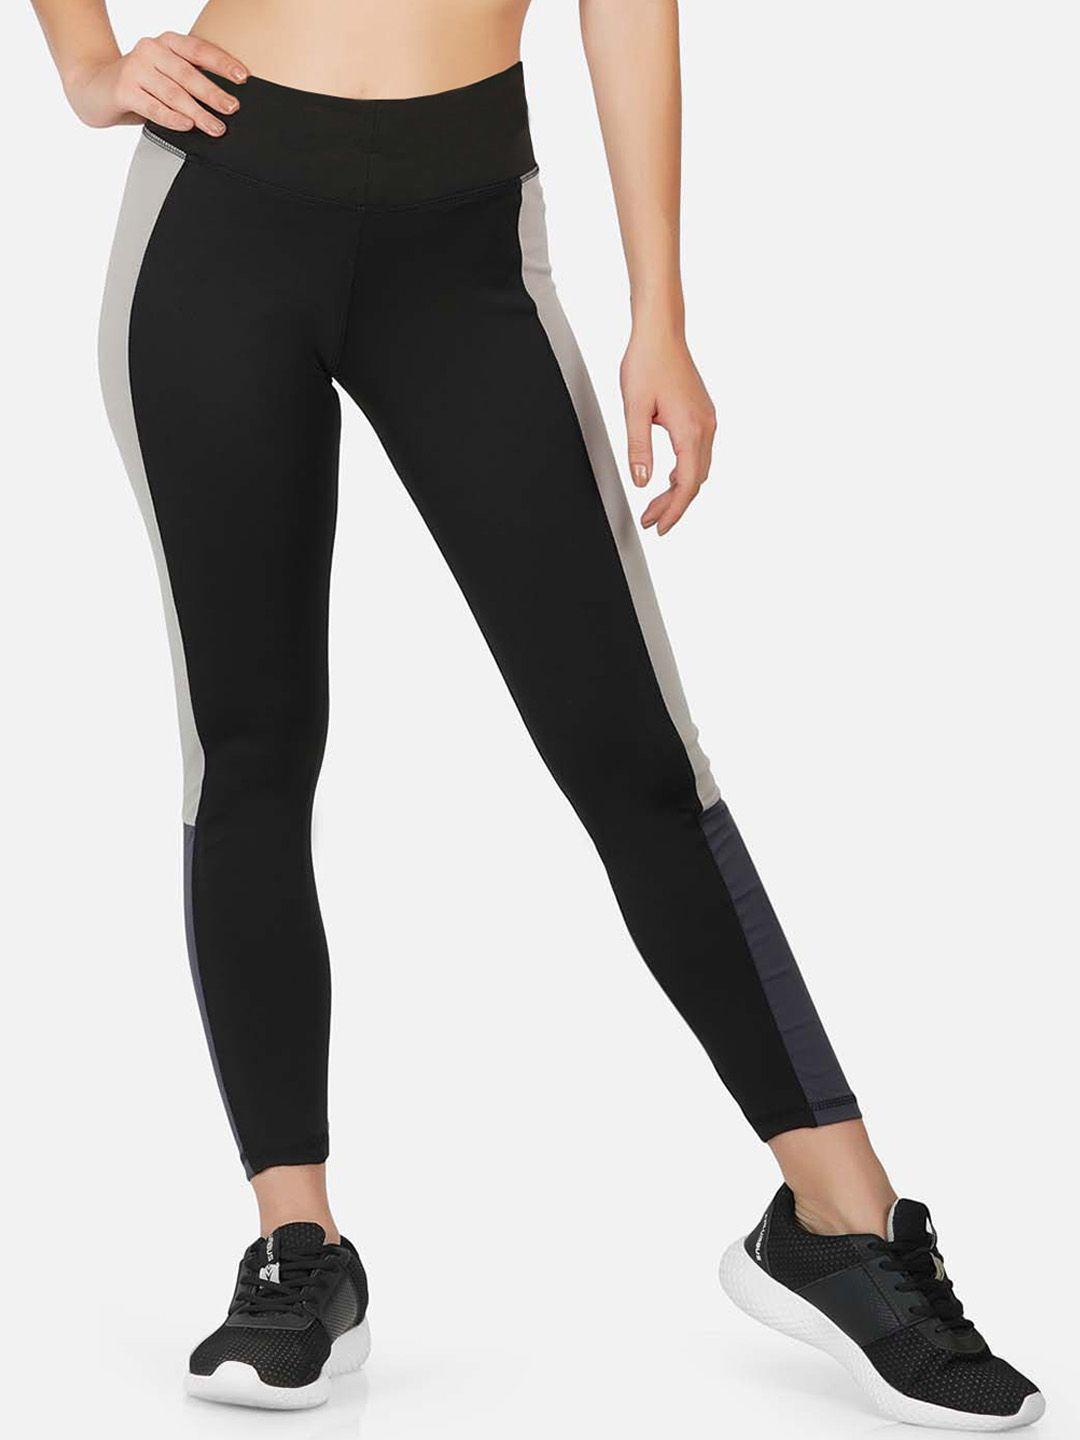 imperative women mid-rise tights